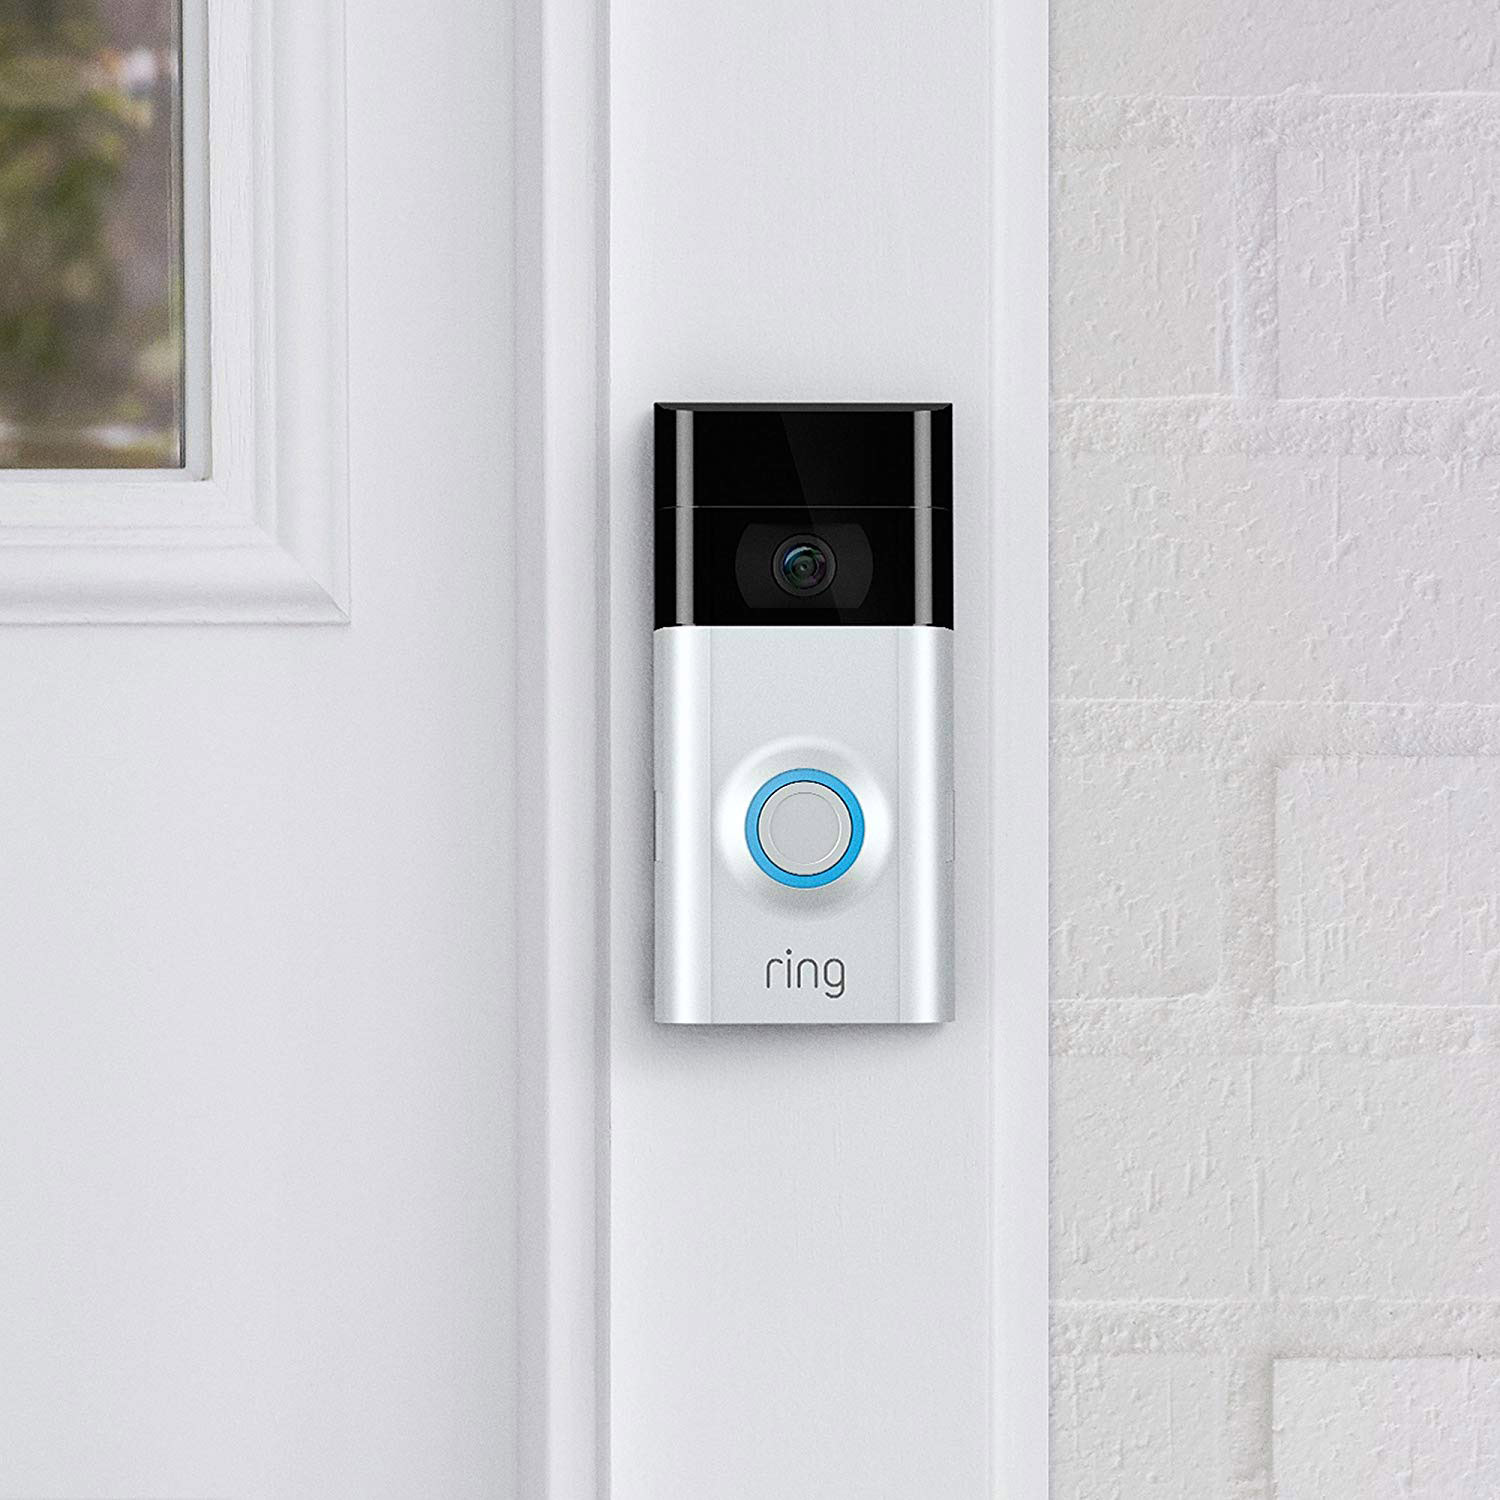 Ring 2 Wi-Fi Enabled Security Video Doorbell, Works with Alexa, Satin Nickel Finish - Includes Free Cleaning Cloth - image 2 of 5